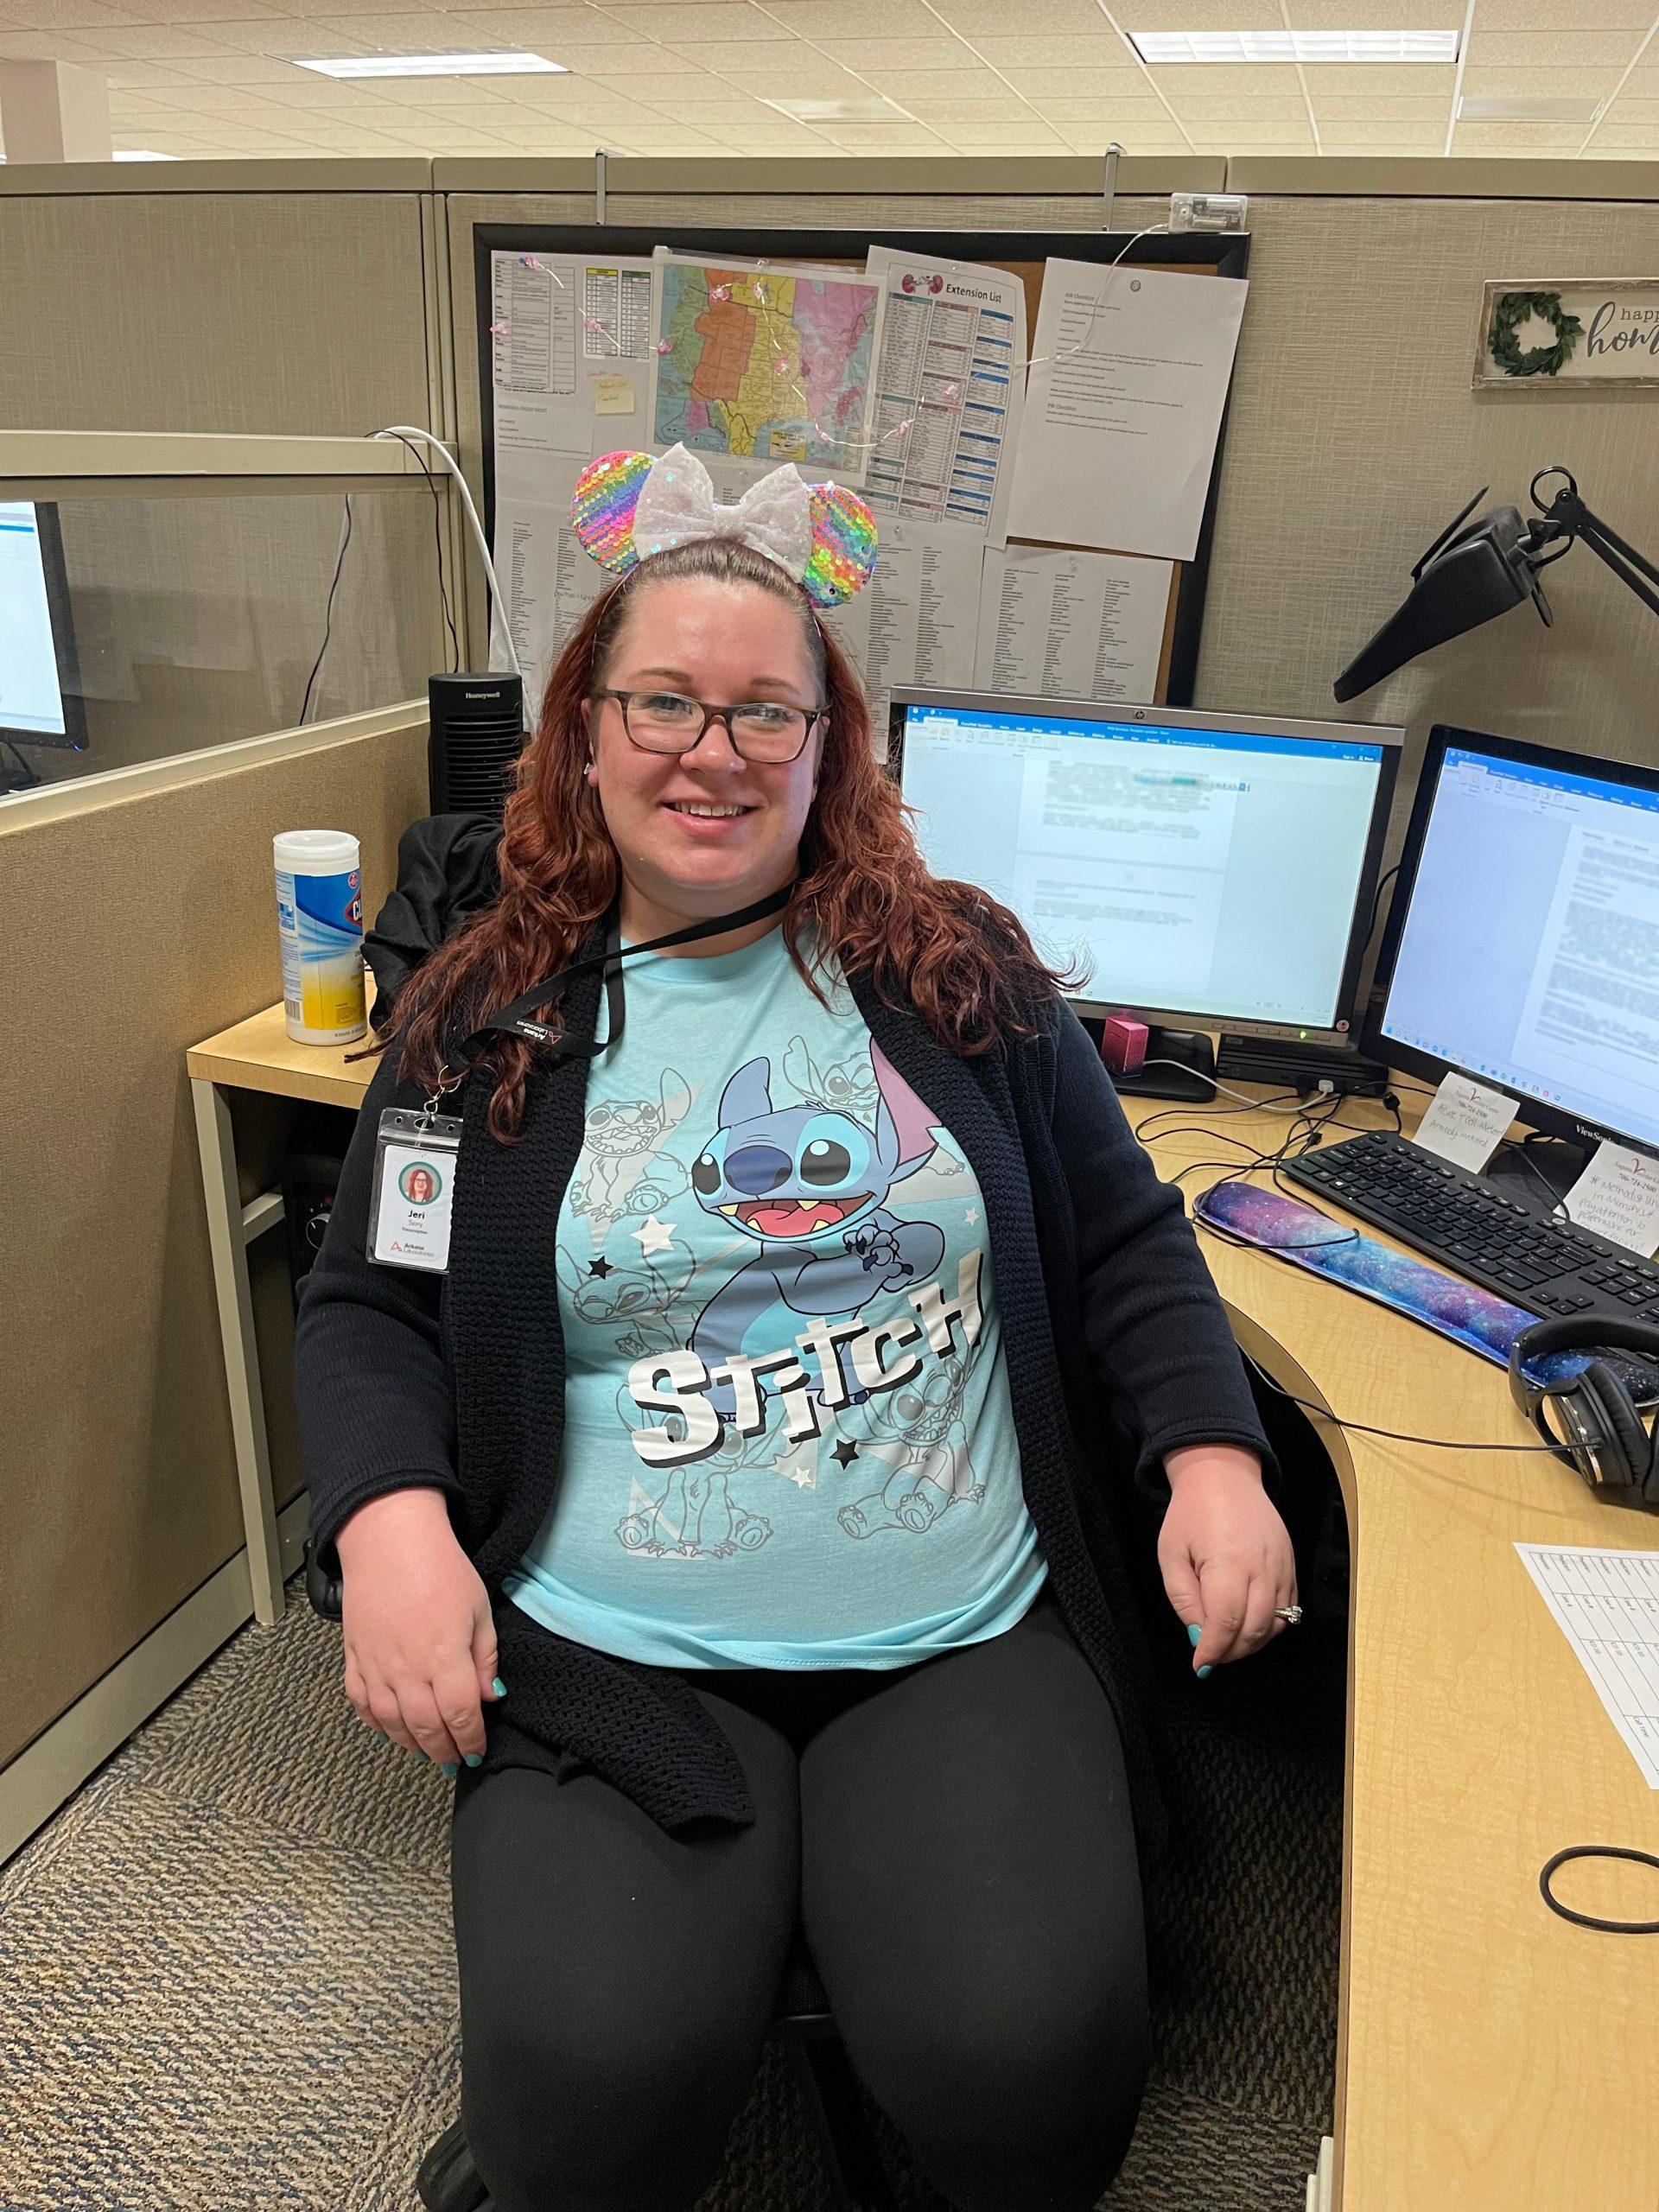 jeri in transcription celebrating Healthcare Documentation Integrity Week by dressing up as stitch